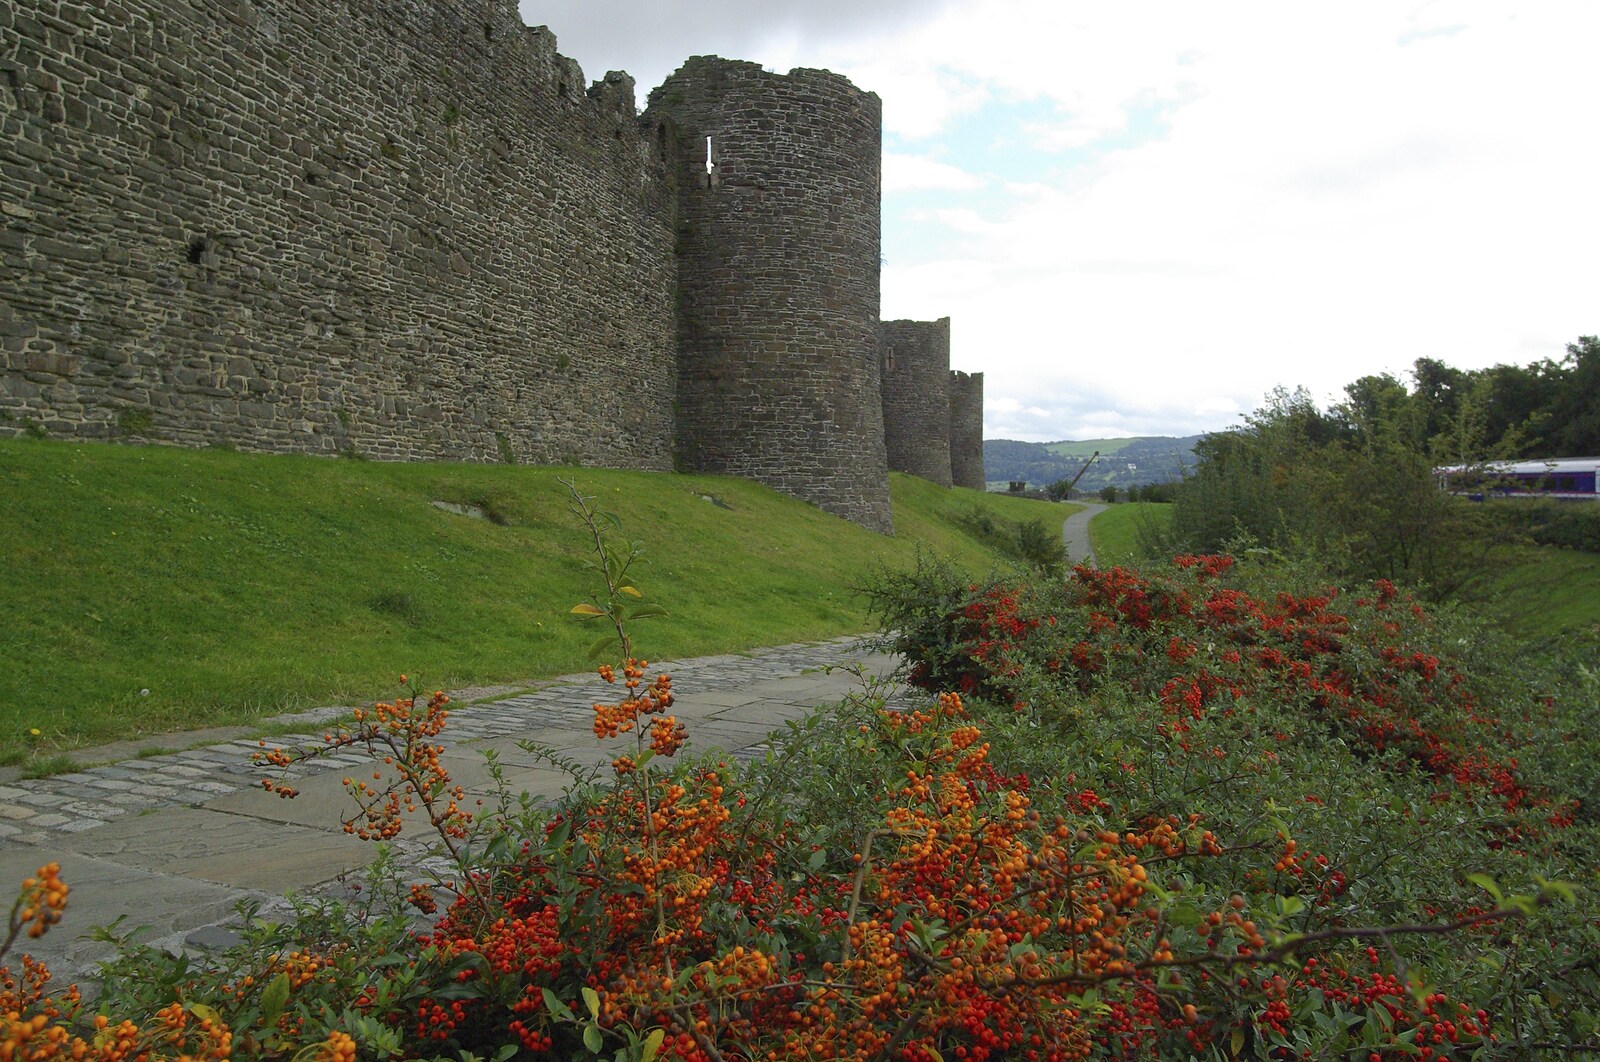 A Road Trip to Ireland Via Sandbach and Conwy, Cheshire and Wales - 21st September 2007: The walls of Conwy castle